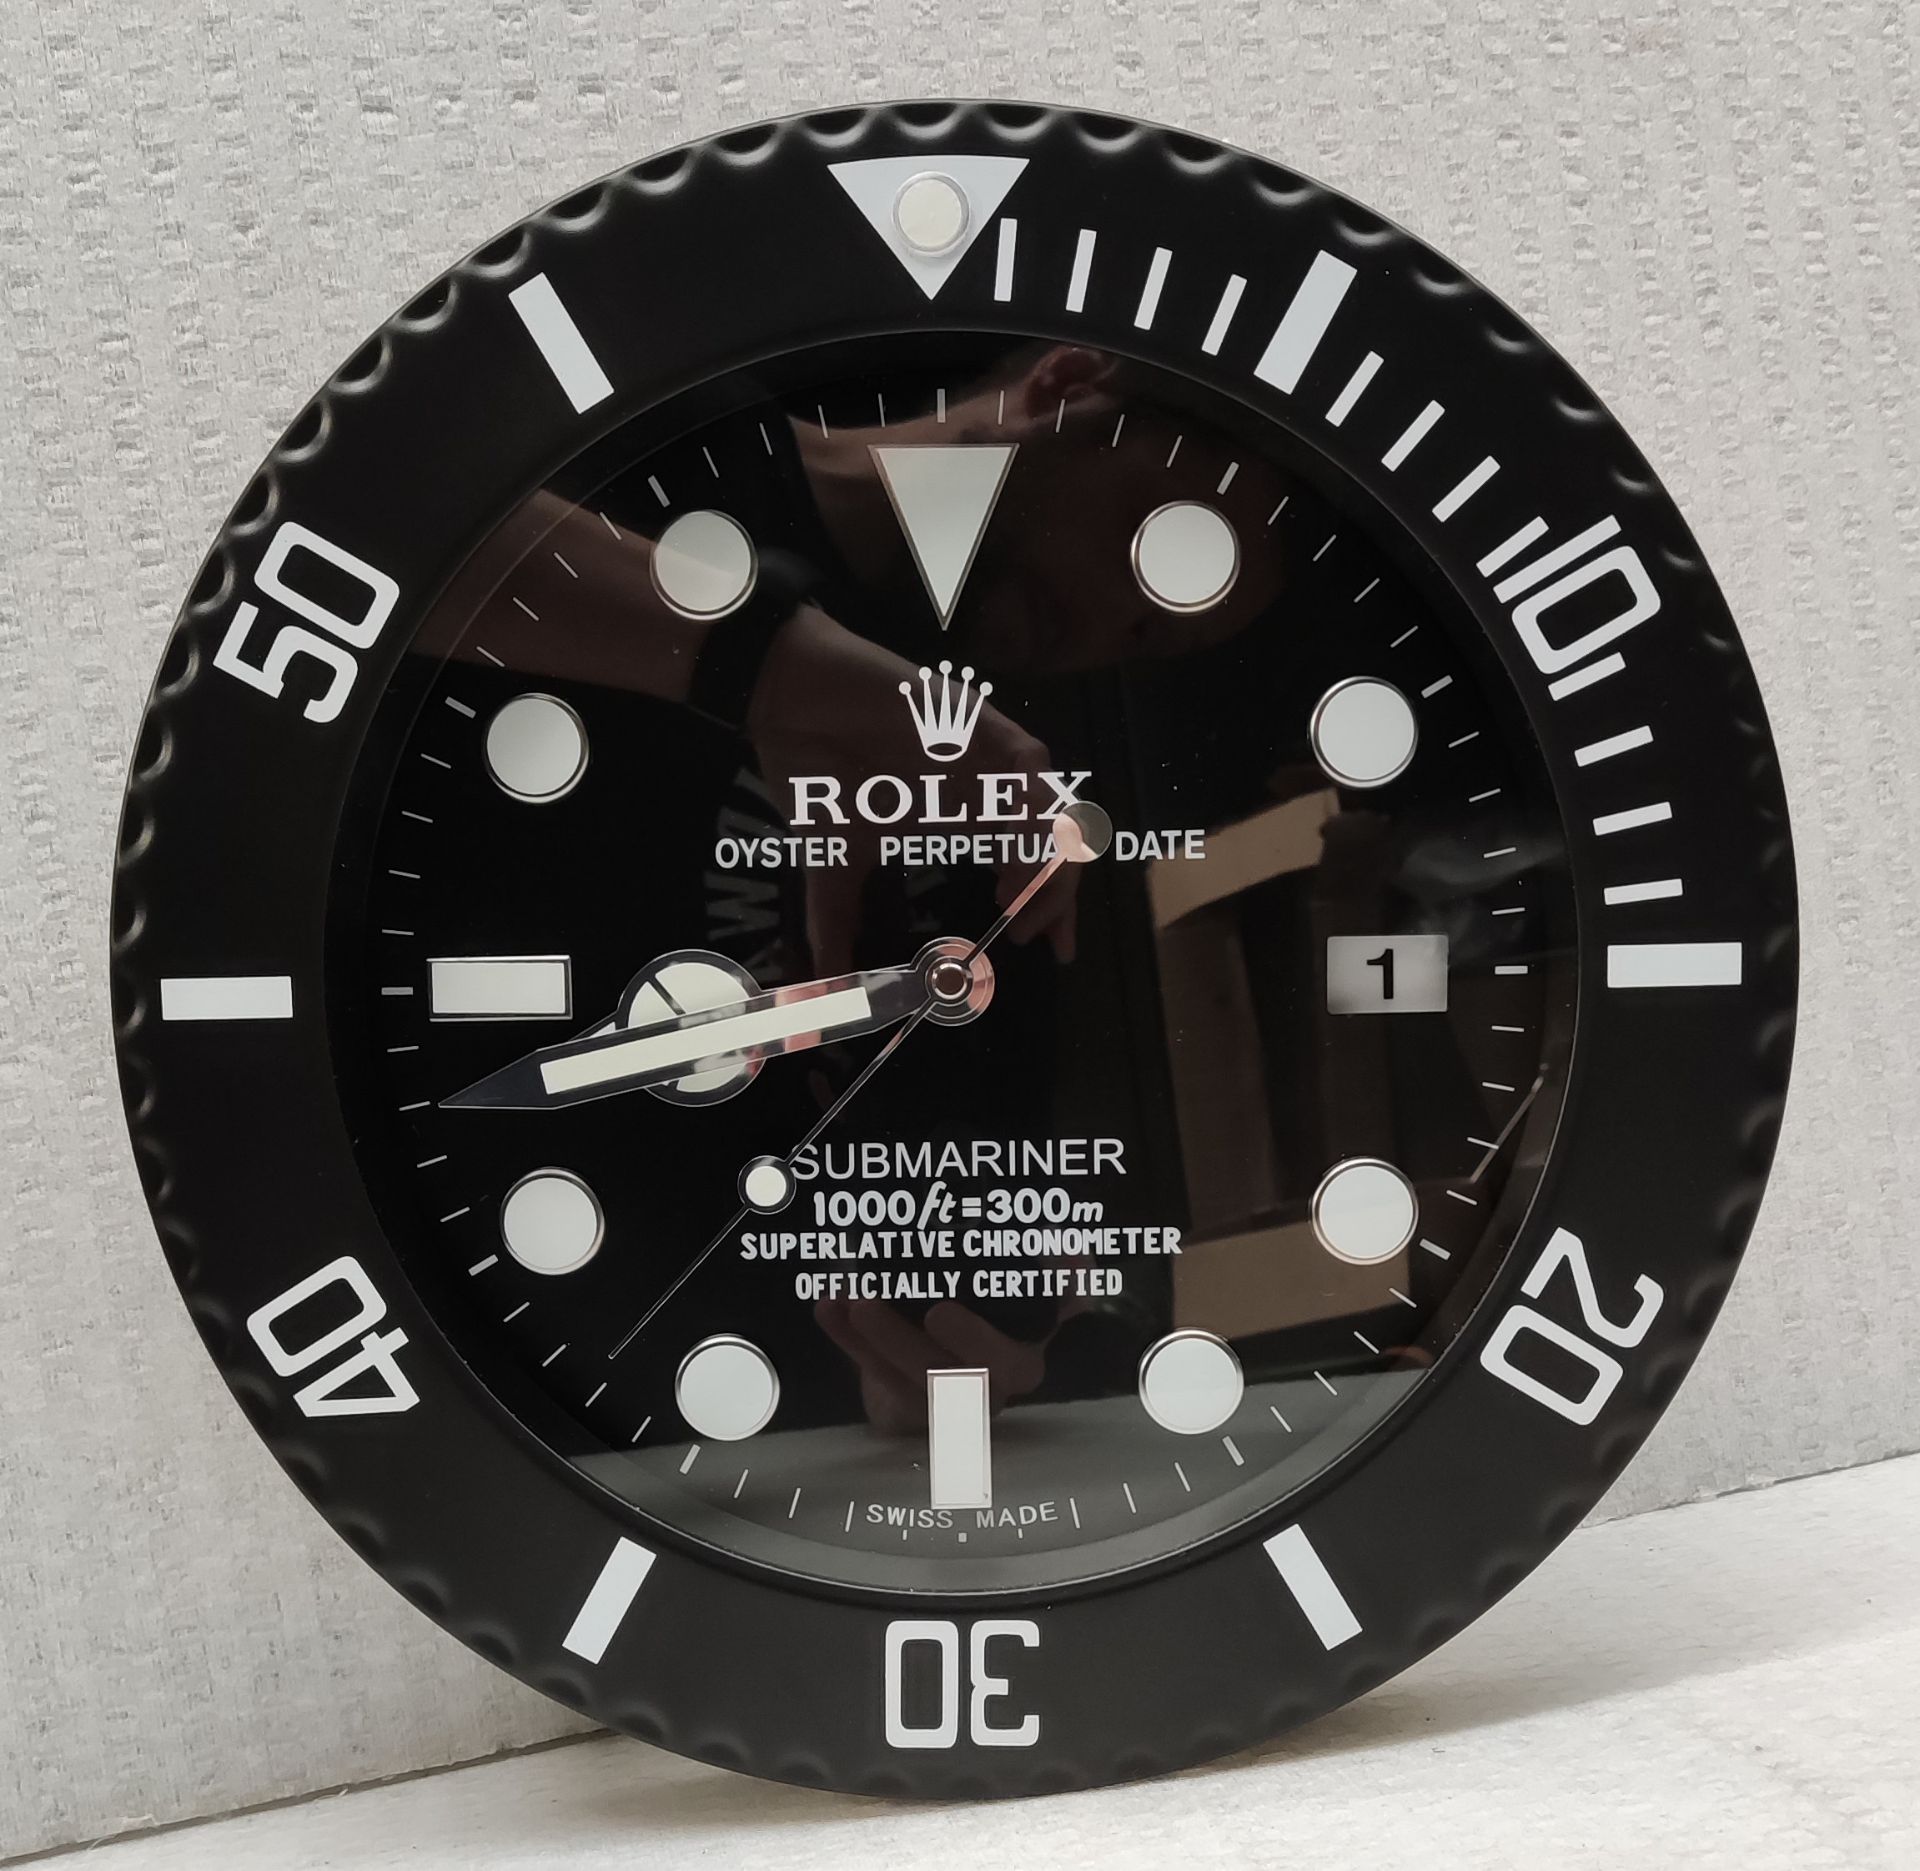 1 x Rolex Submariner Dealer Only Wall Clock - CL444 - Location: Altrincham WA14 Fully working and in - Image 11 of 13